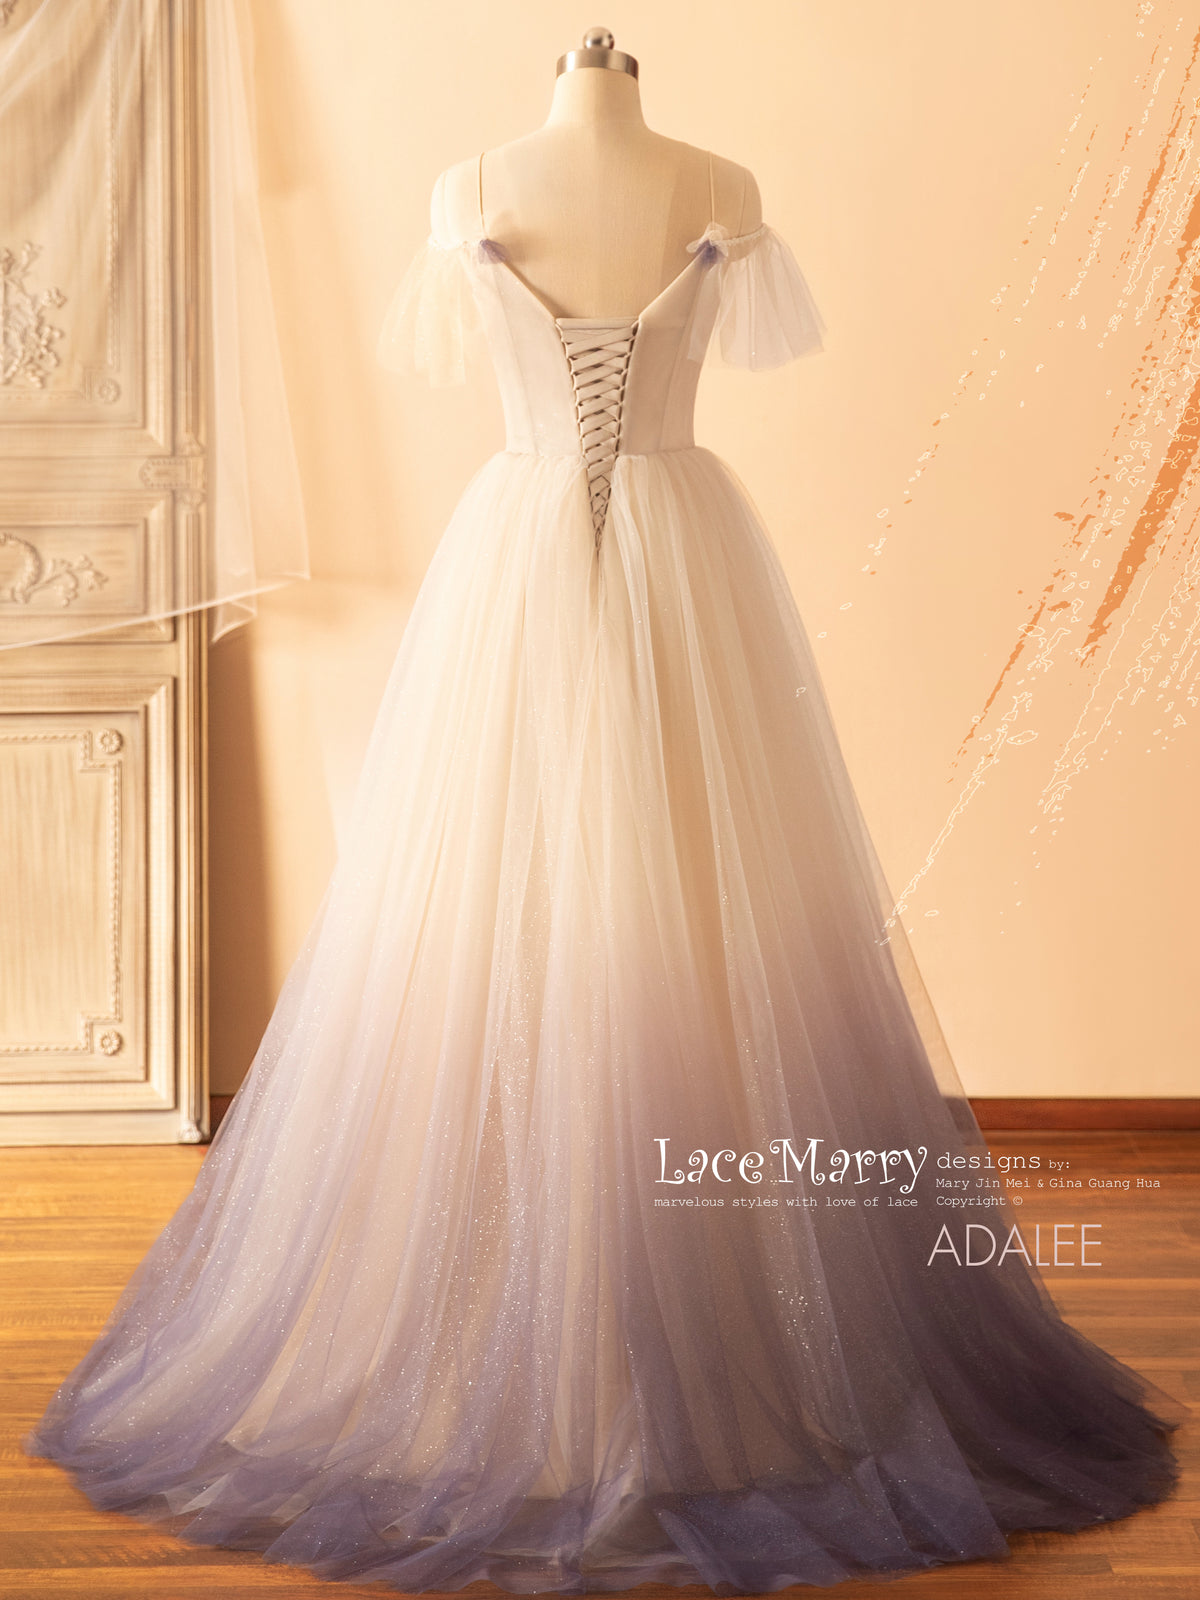 ADALEE / Ombre Glitter Wedding Dress with Purple and Nude Tone